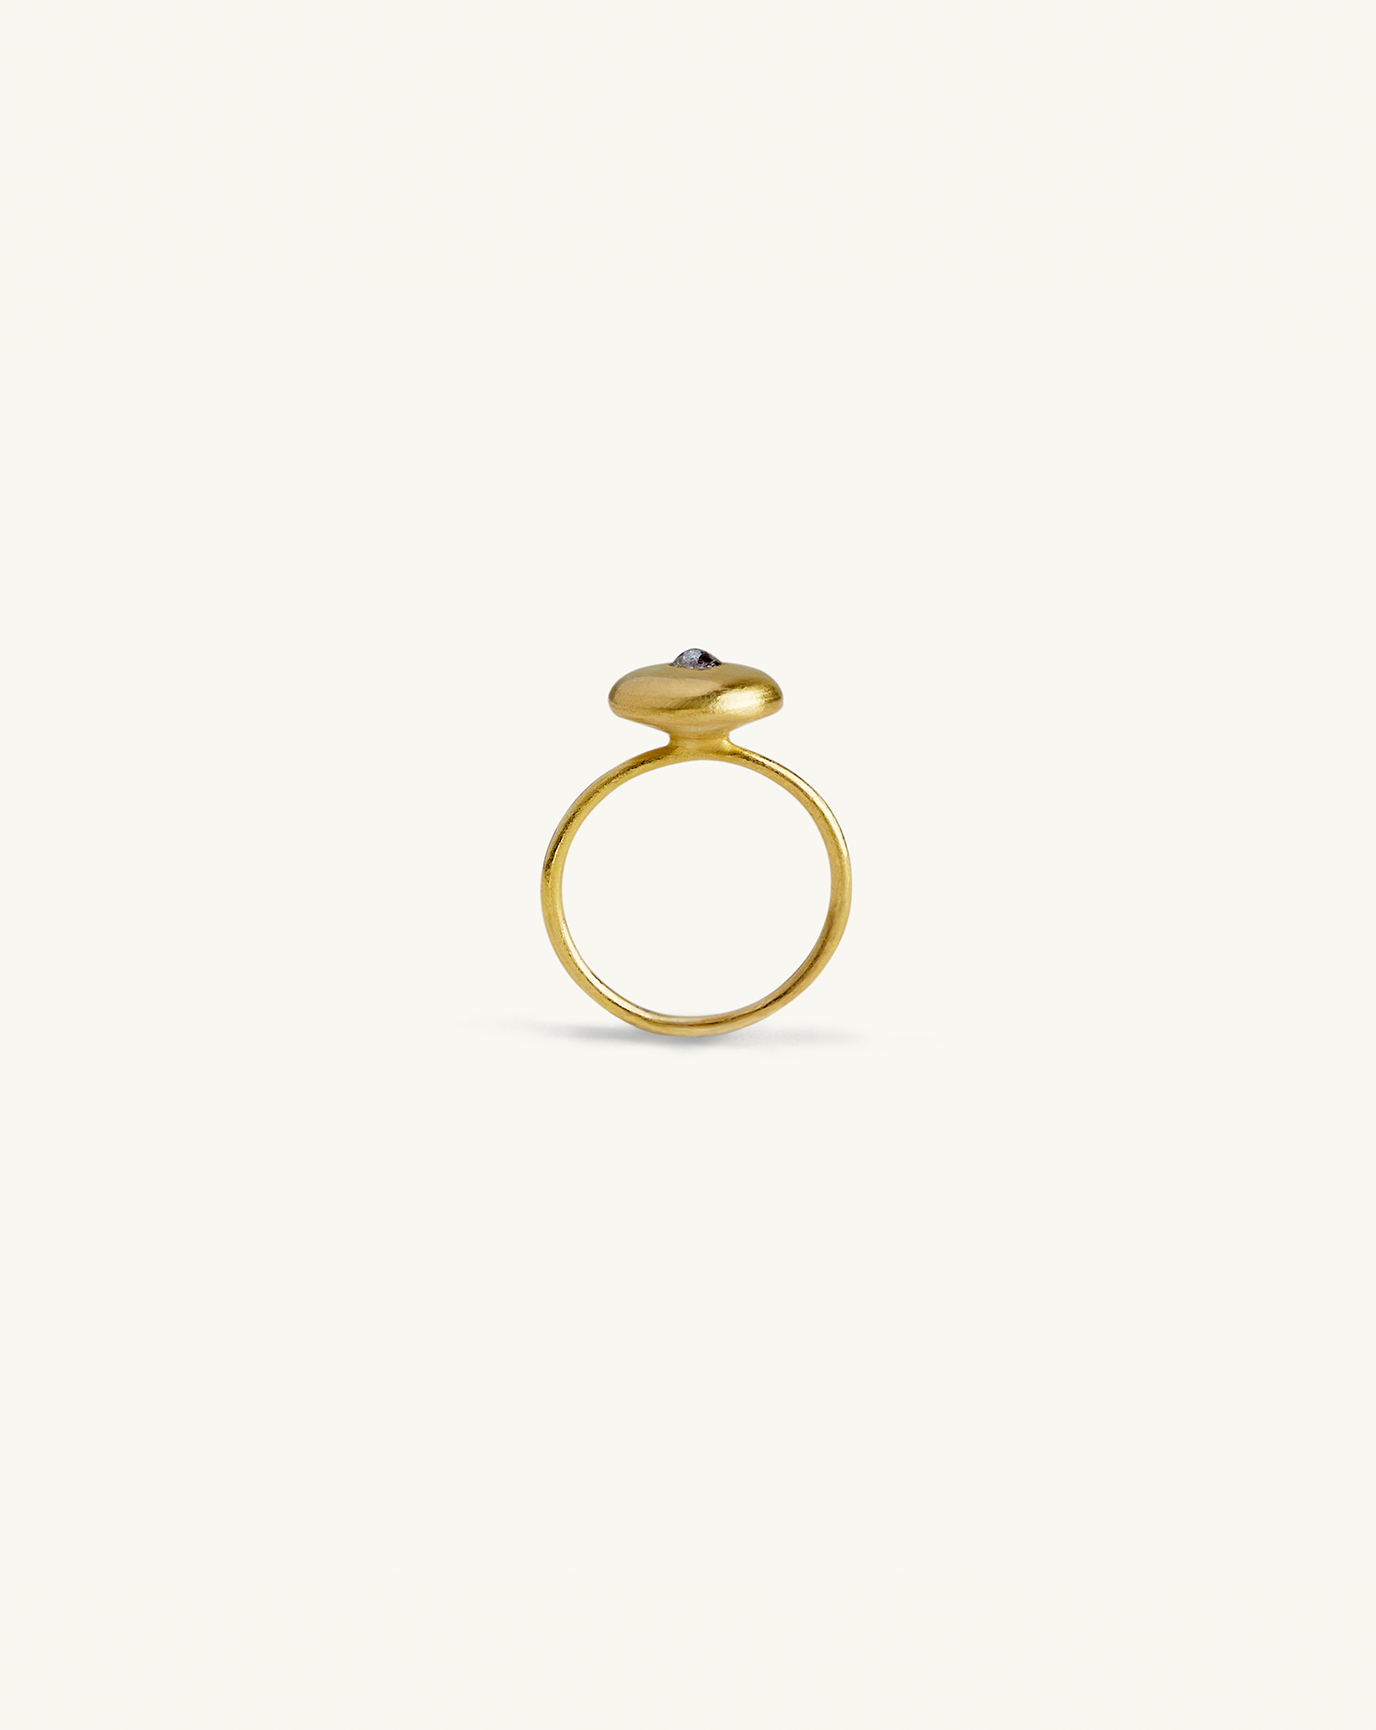 Product profile image of the gold i seira pod ring with black diamond